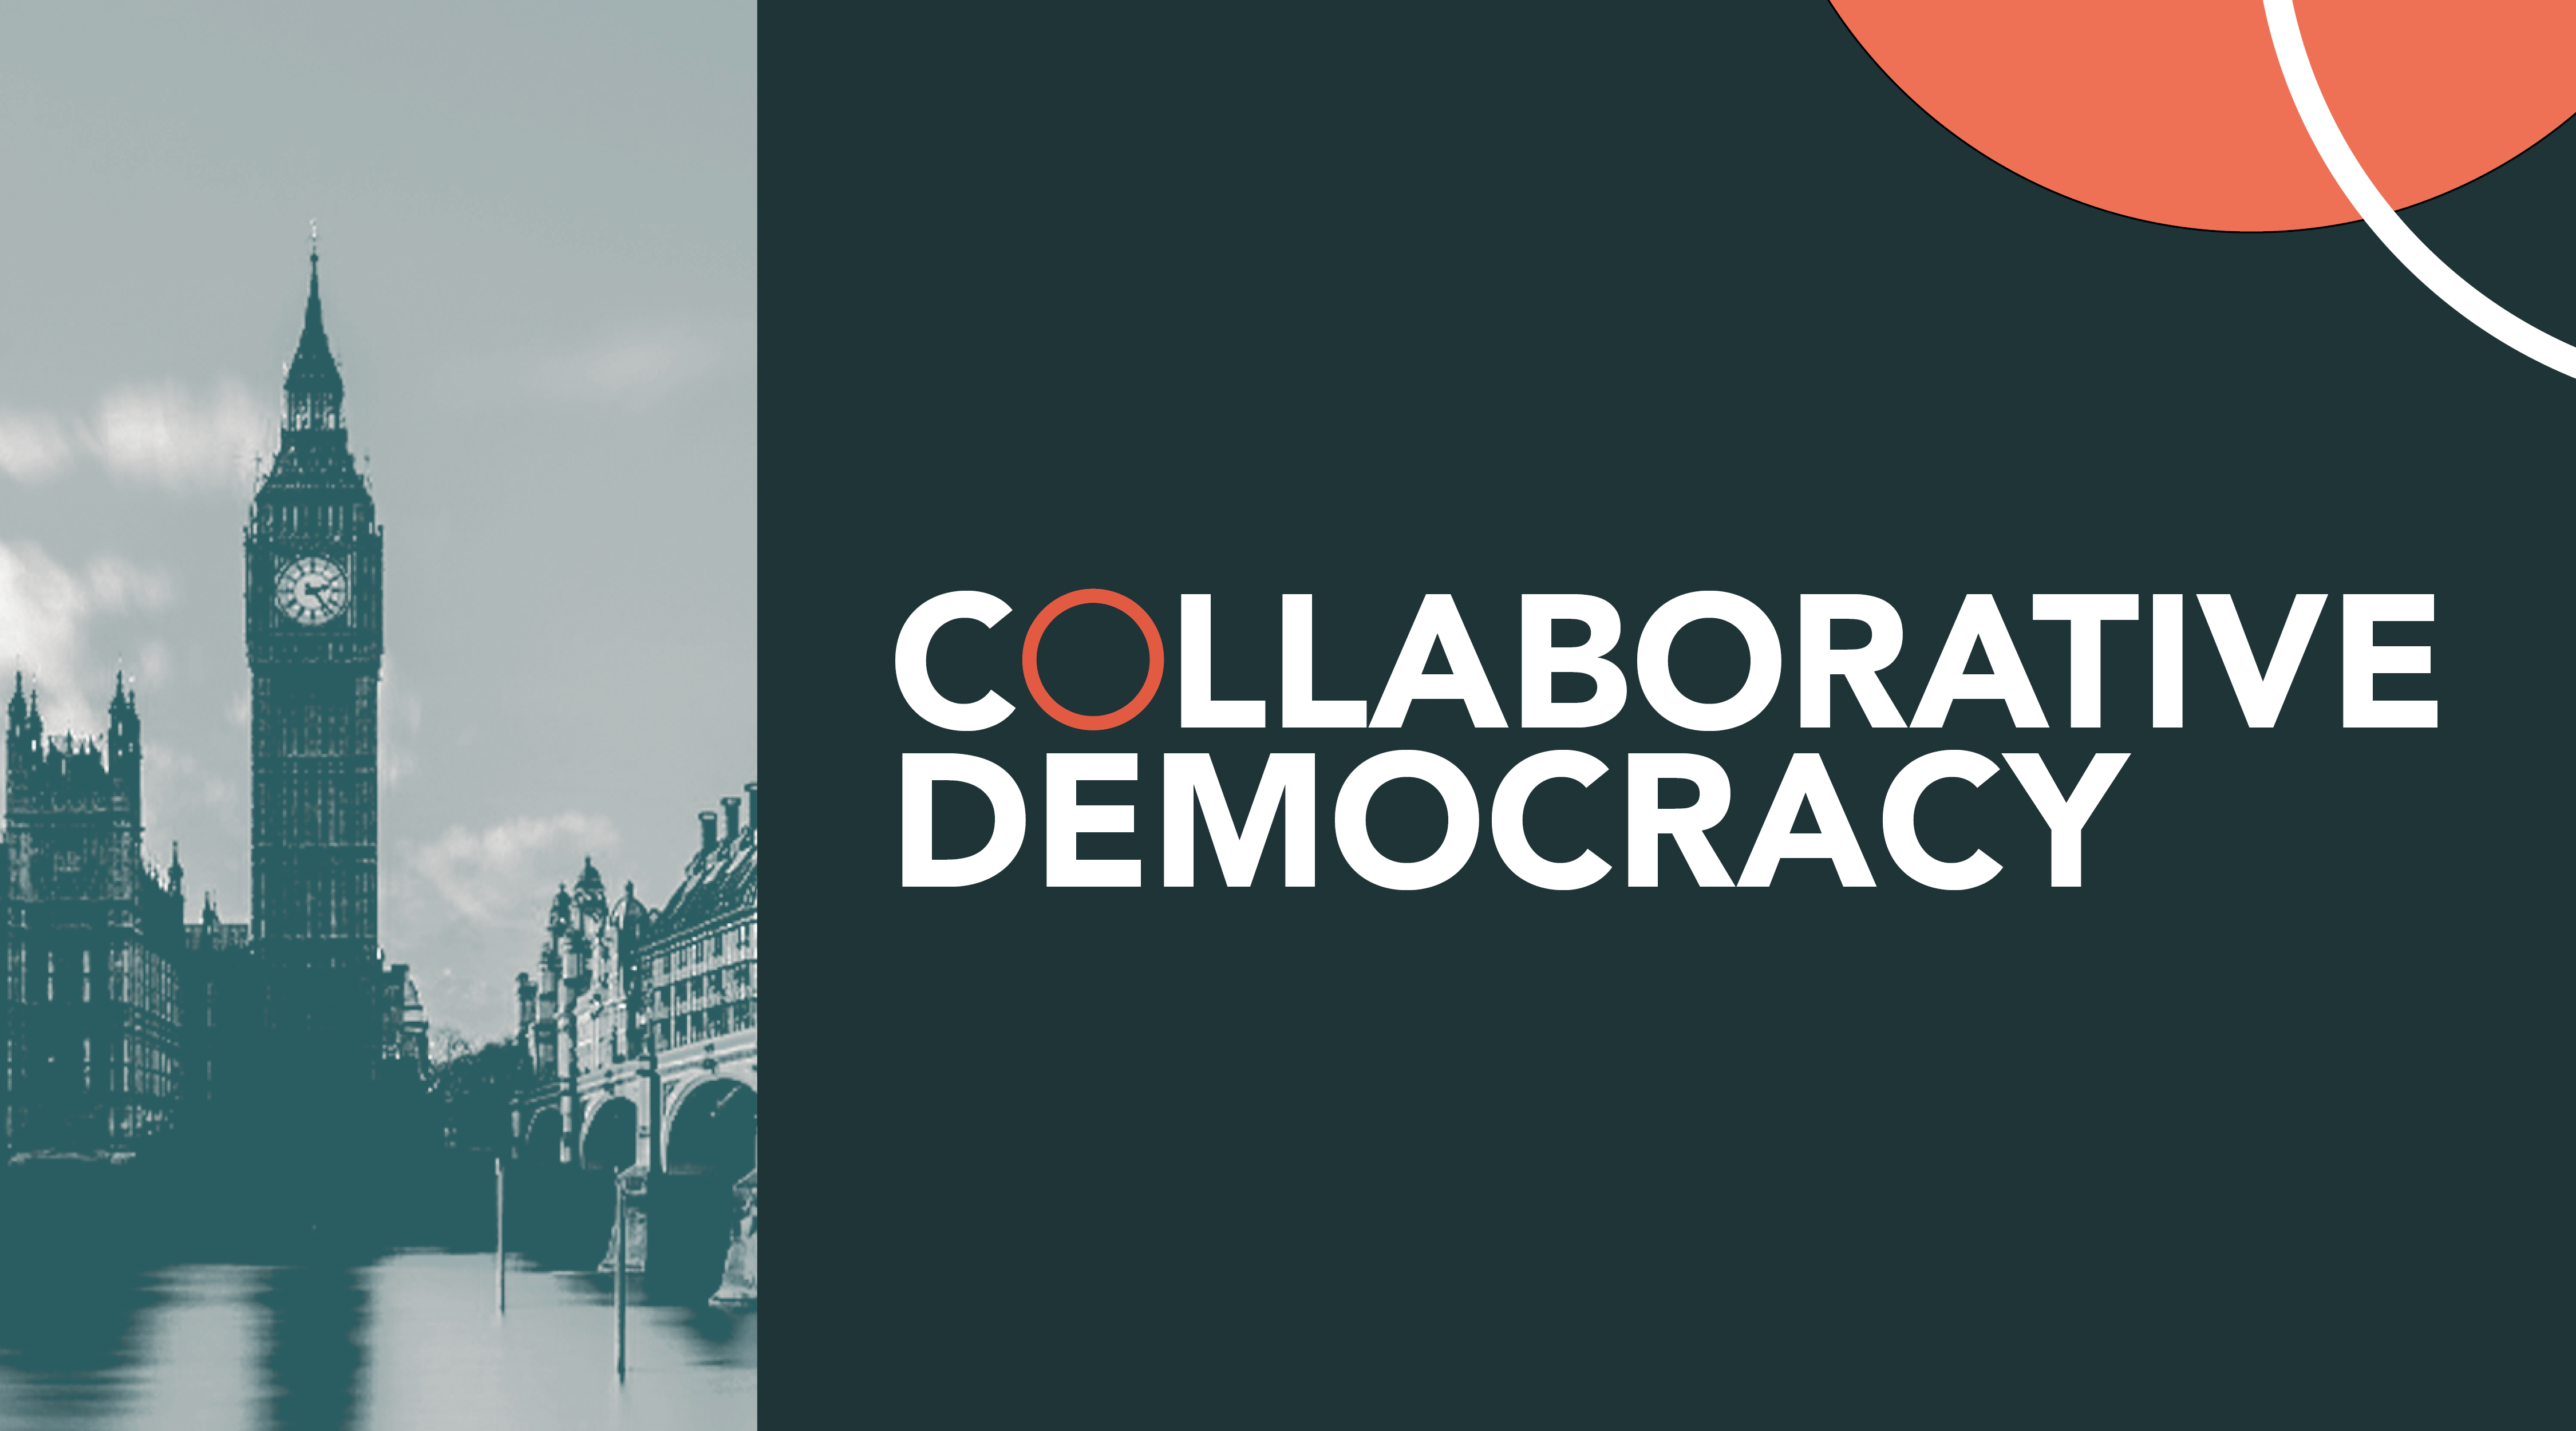 A more Collaborative Democracy, in which politicians, experts and citizens partner to tackle the challenges facing our country